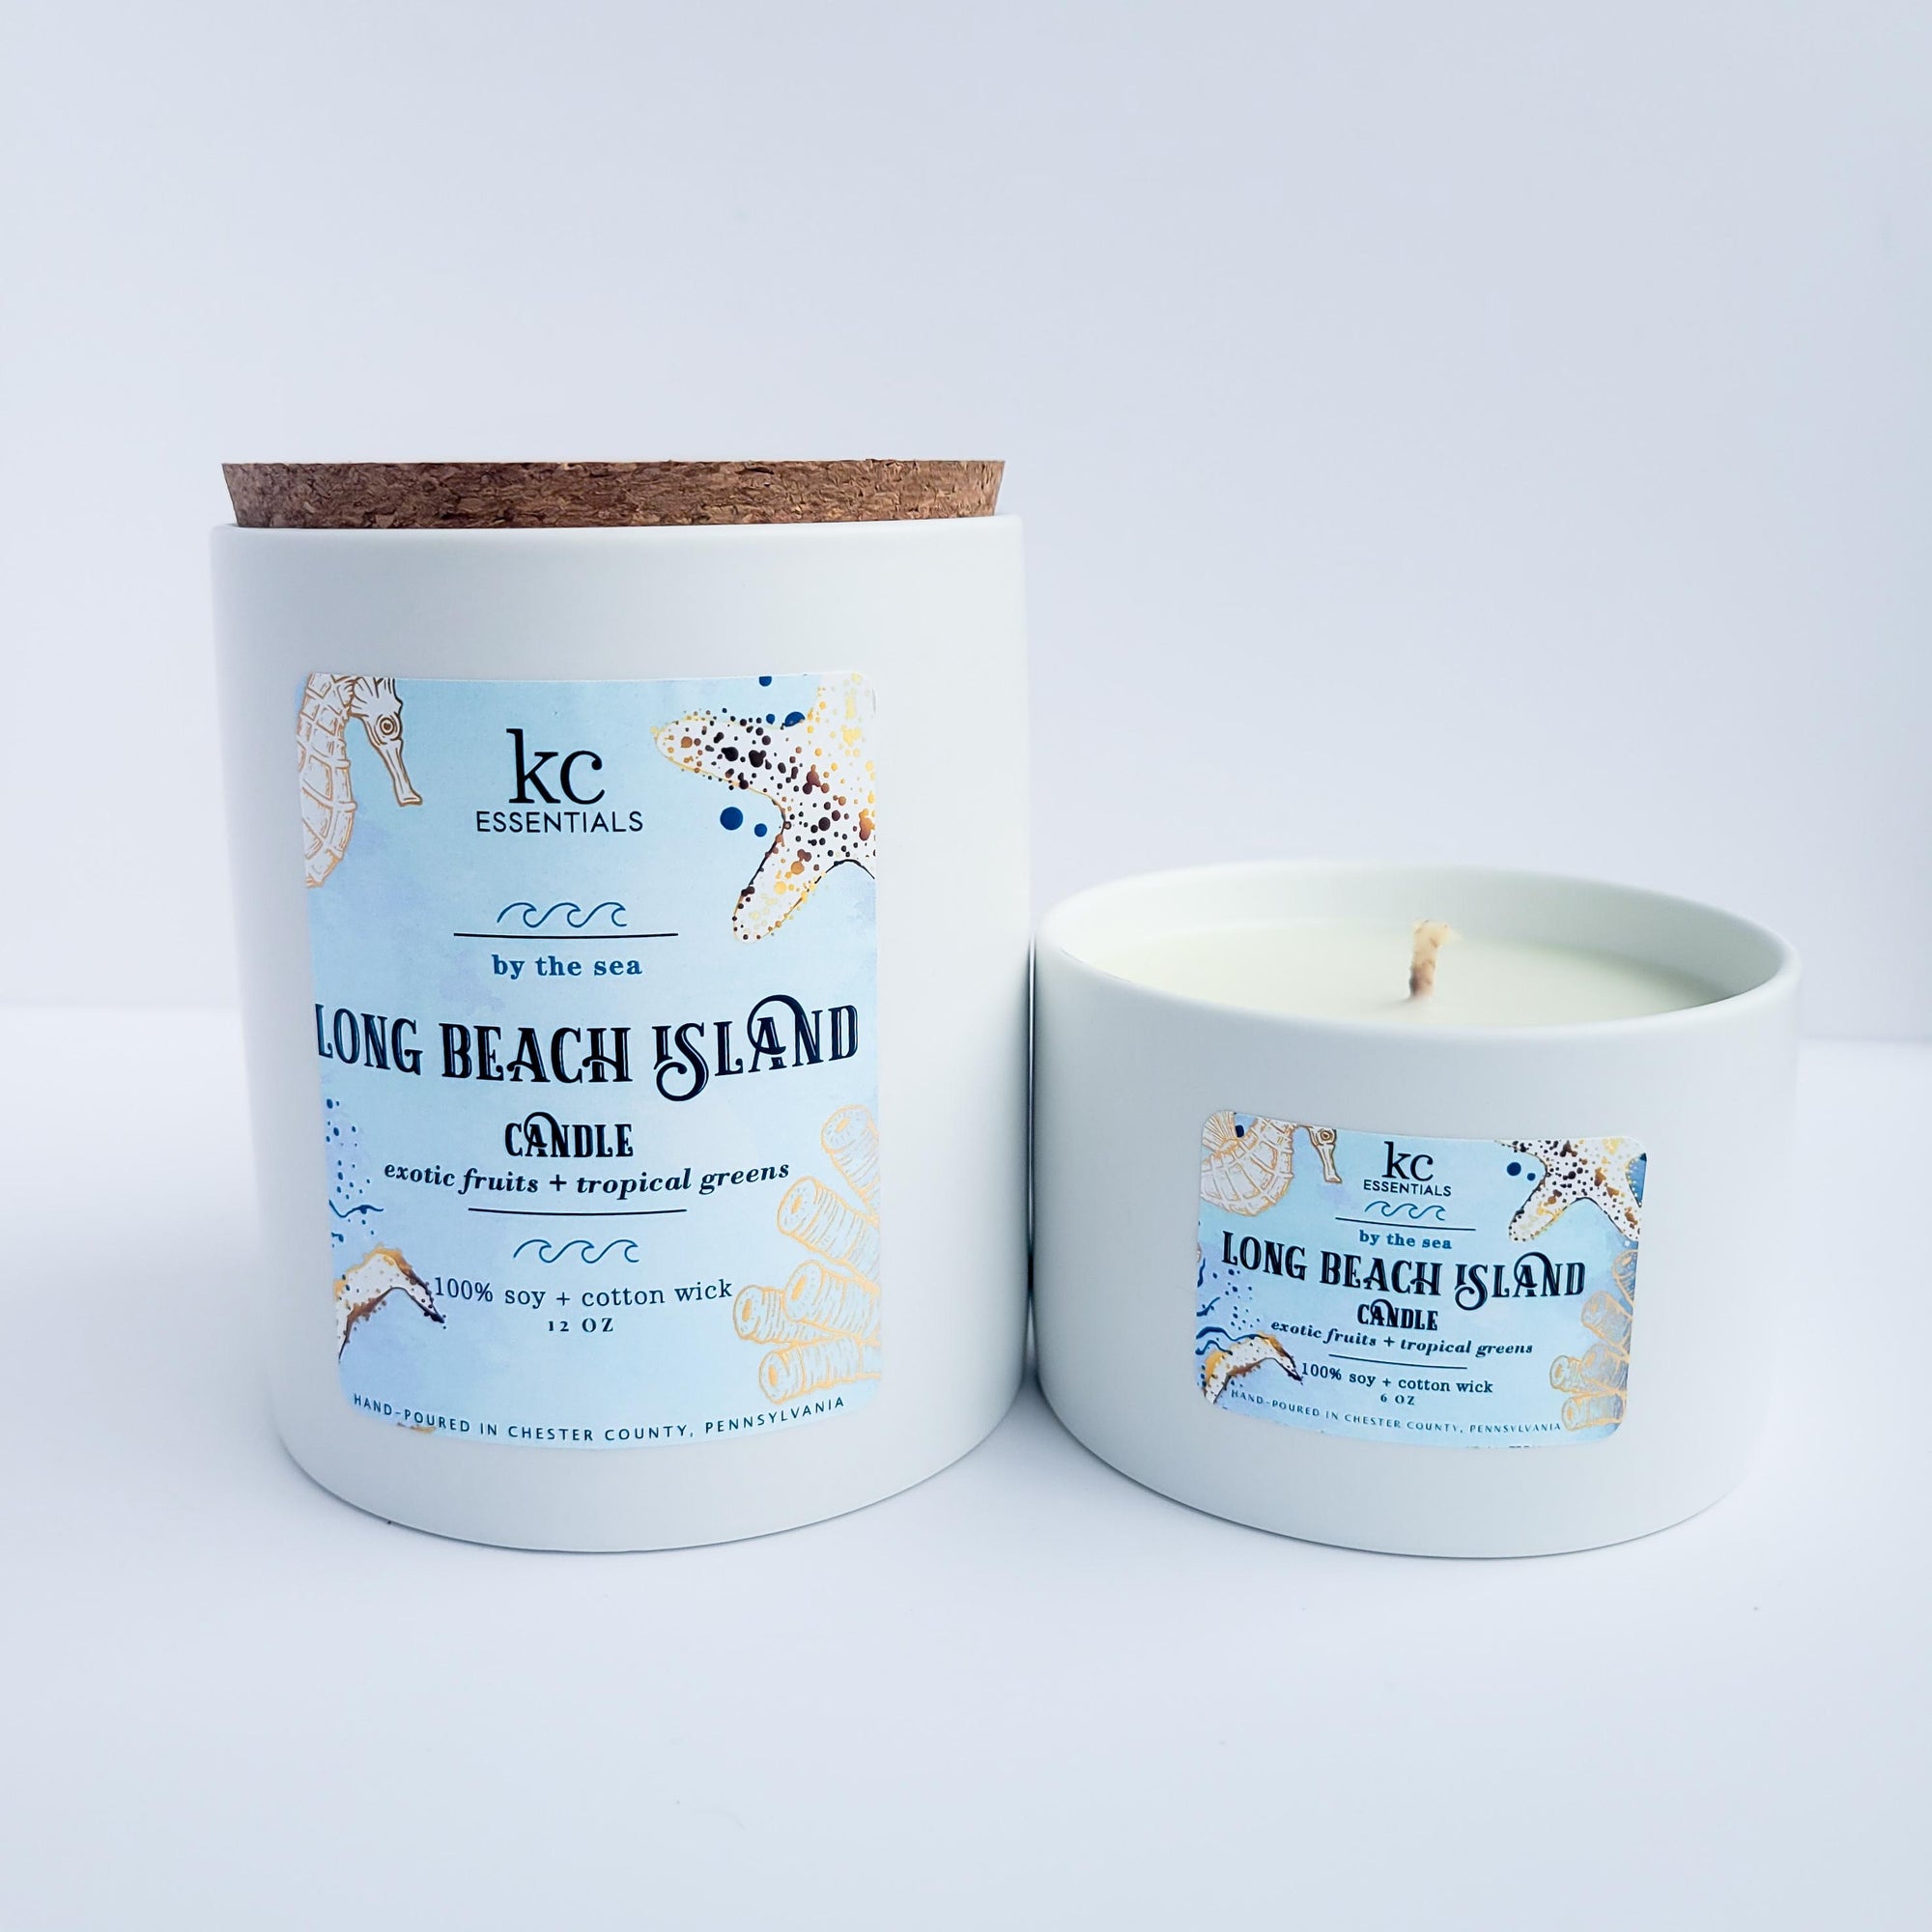 Long Beach Island Jersey Shore Candle made with 100 percent soy, includes cork lid.